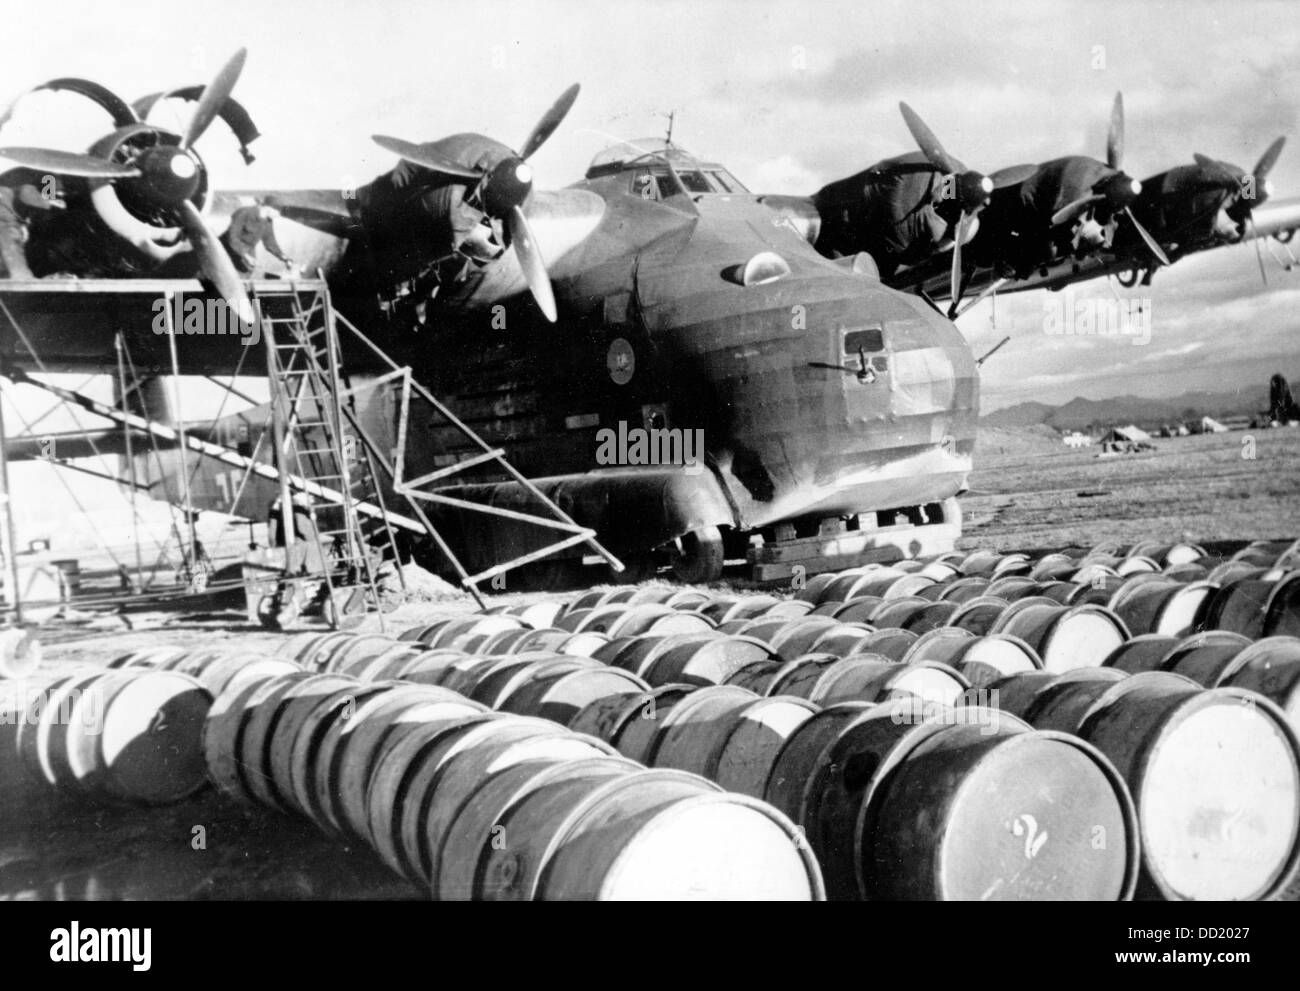 The image from the Nazi Propaganda! shows the transportation aircraft Me 323 produced by Messerschmitt, which has an enormous cargo compartment, in November 1943. Place unknown. Fotoarchiv für Zeitgeschichte Stock Photo